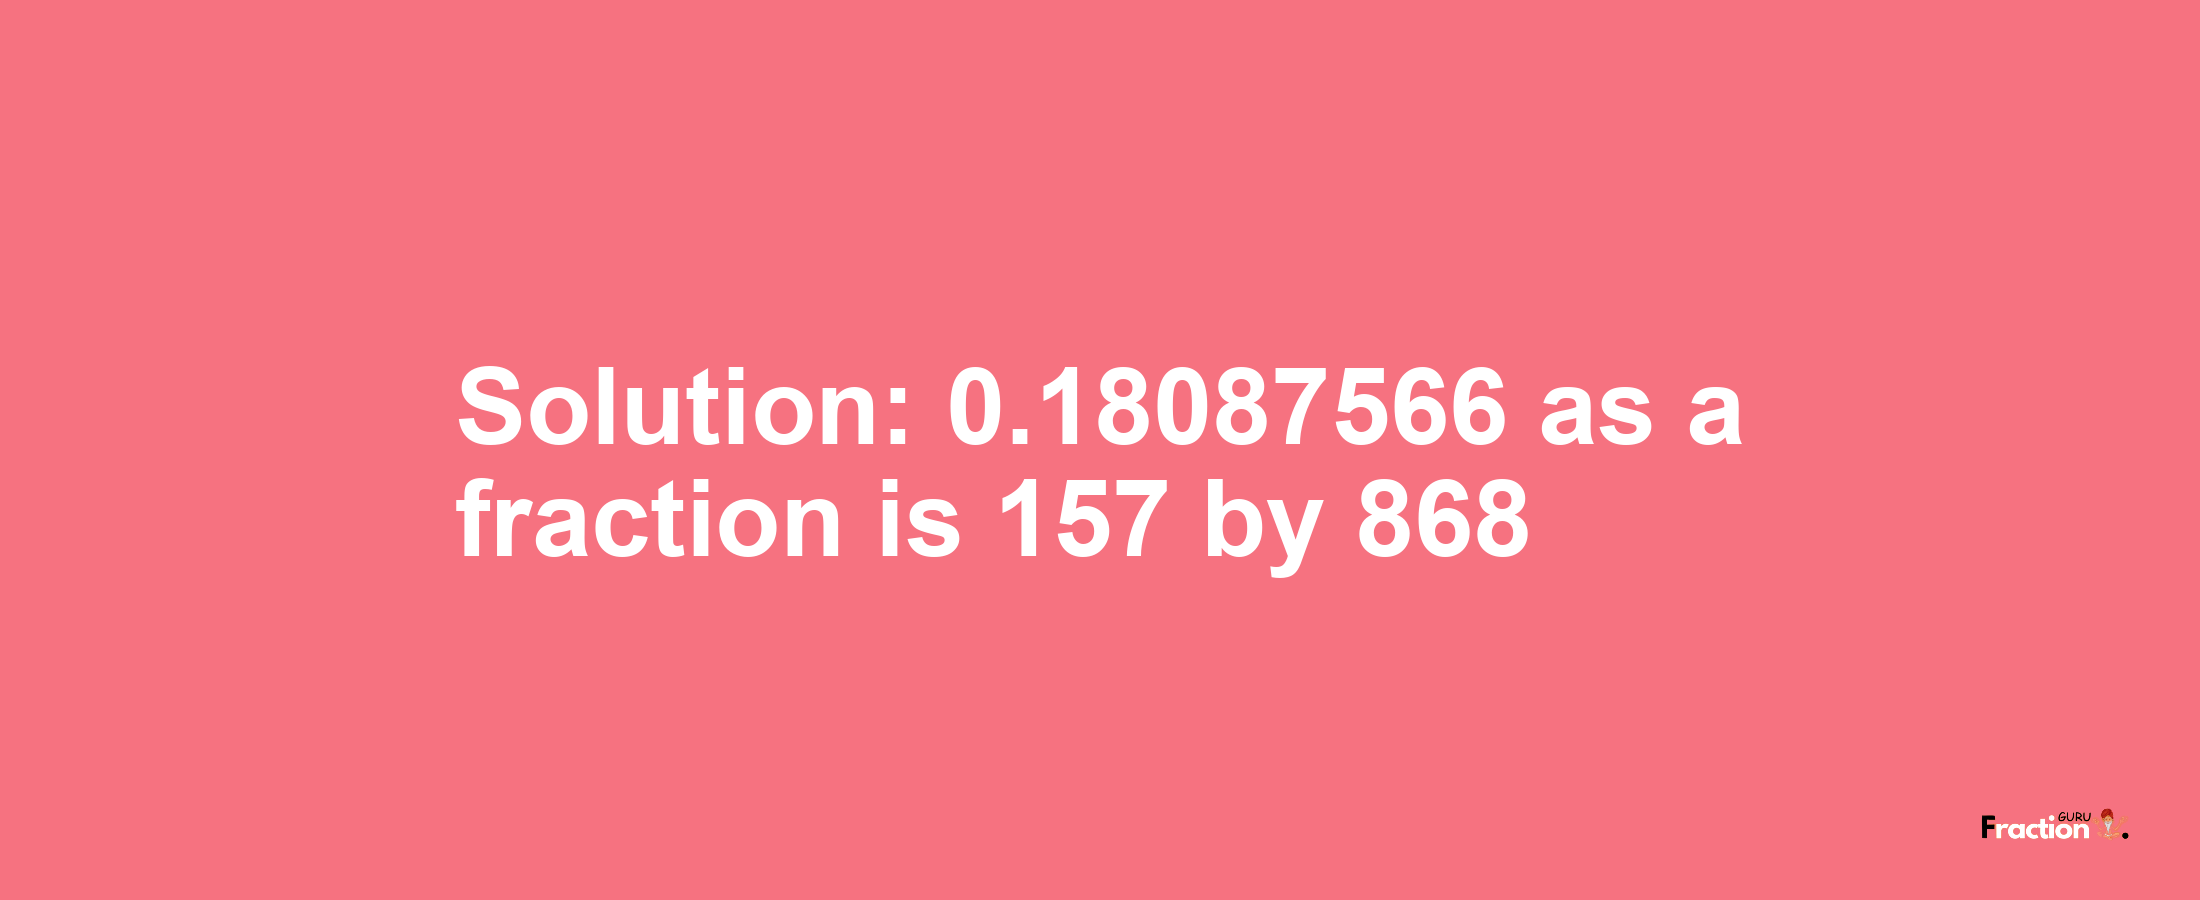 Solution:0.18087566 as a fraction is 157/868